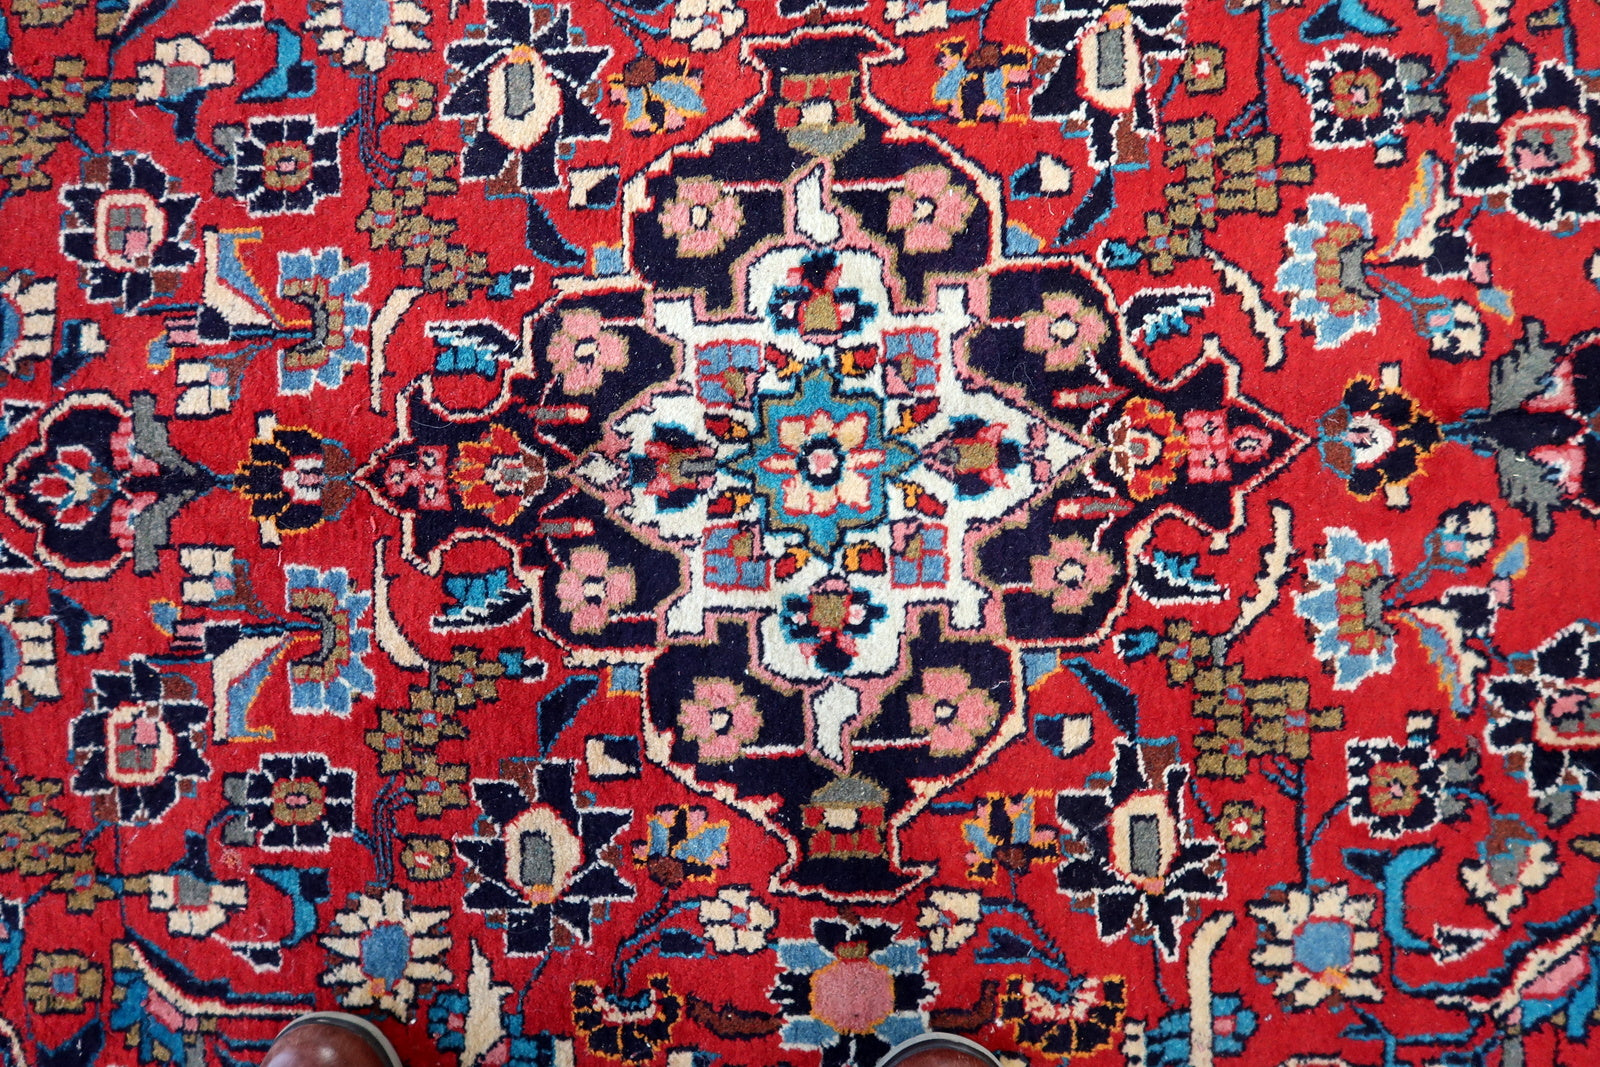 Close-up of the wool fibers, highlighting the rug's durability and texture